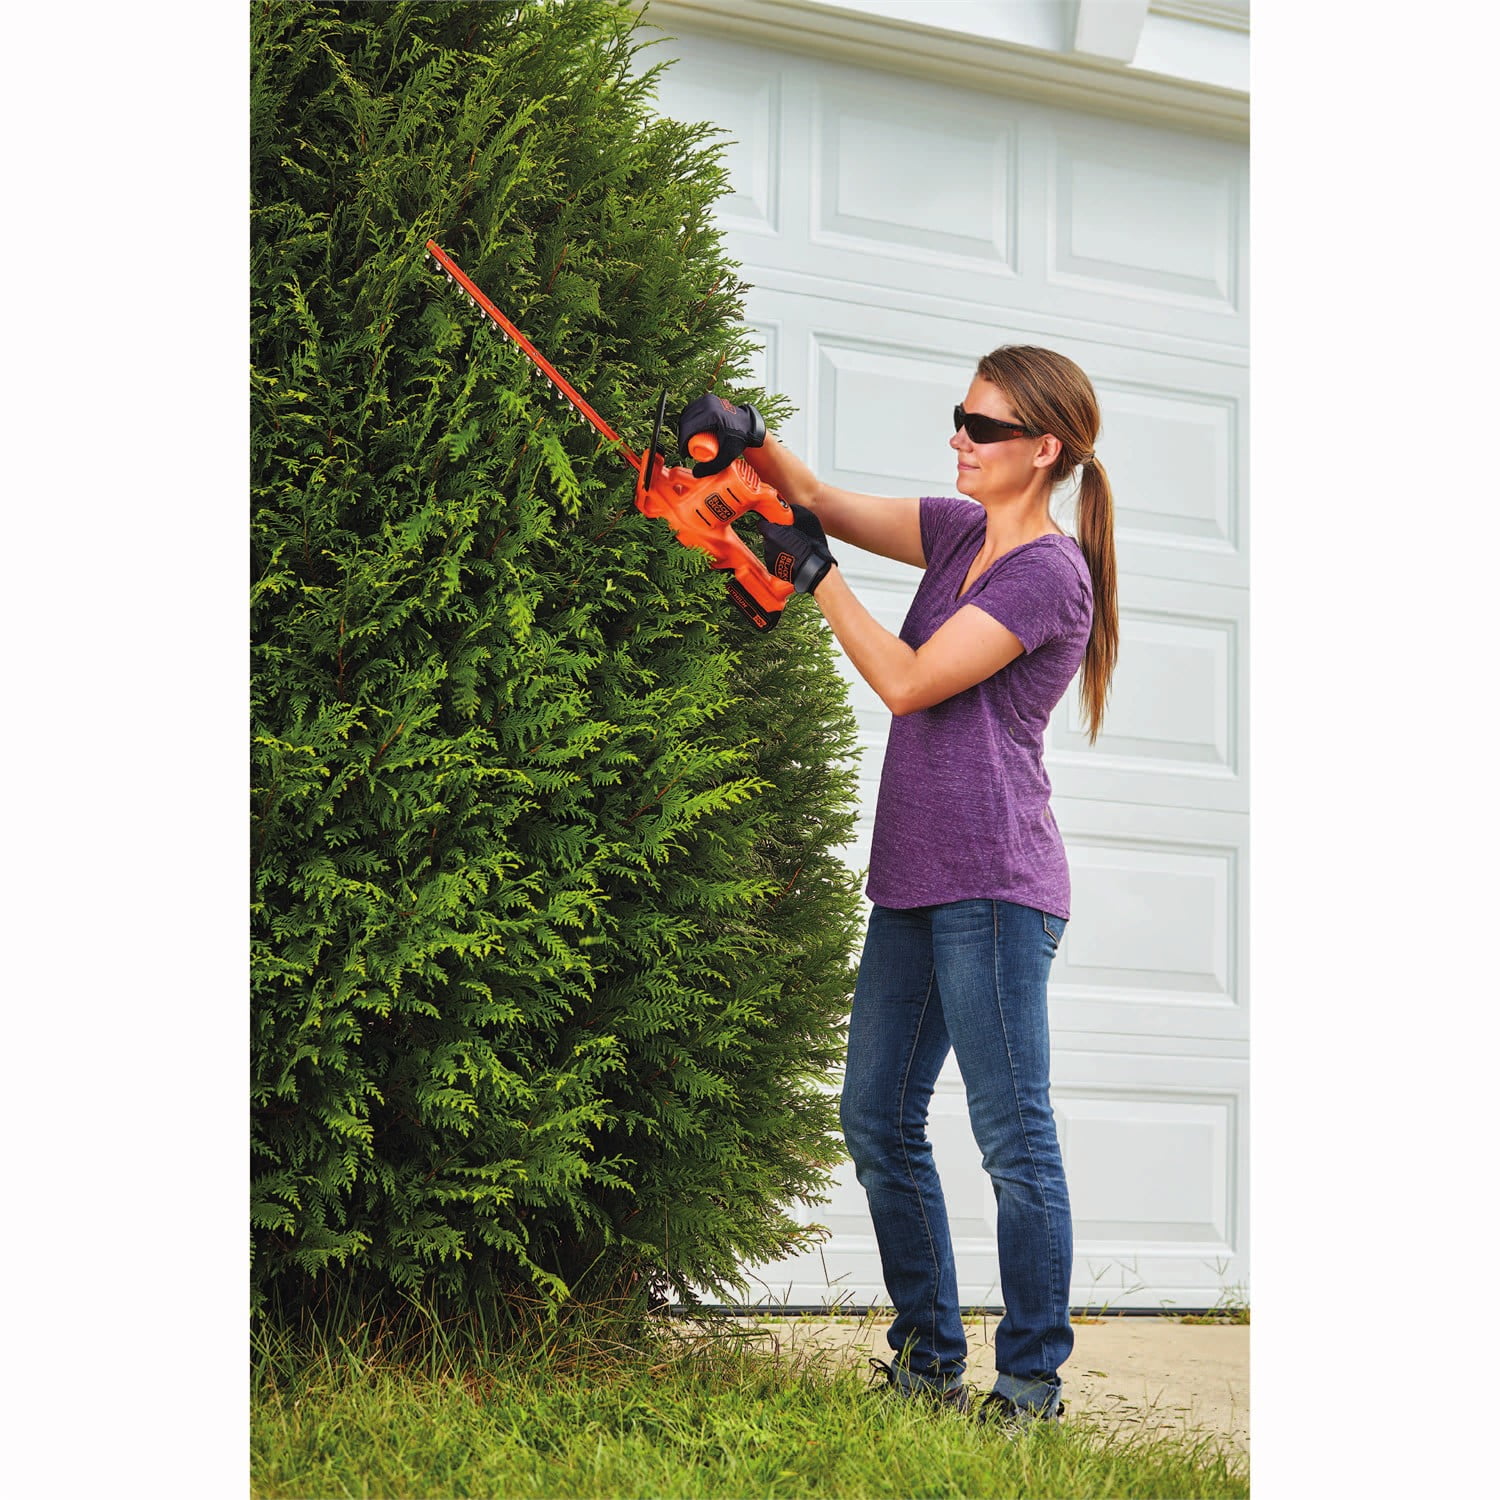  BLACK+DECKER 20V MAX Cordless Pole Hedge Trimmer, 18-Inch  (LPHT120) & 20V Max Lithium Sweeper (LSW221) : Patio, Lawn & Garden